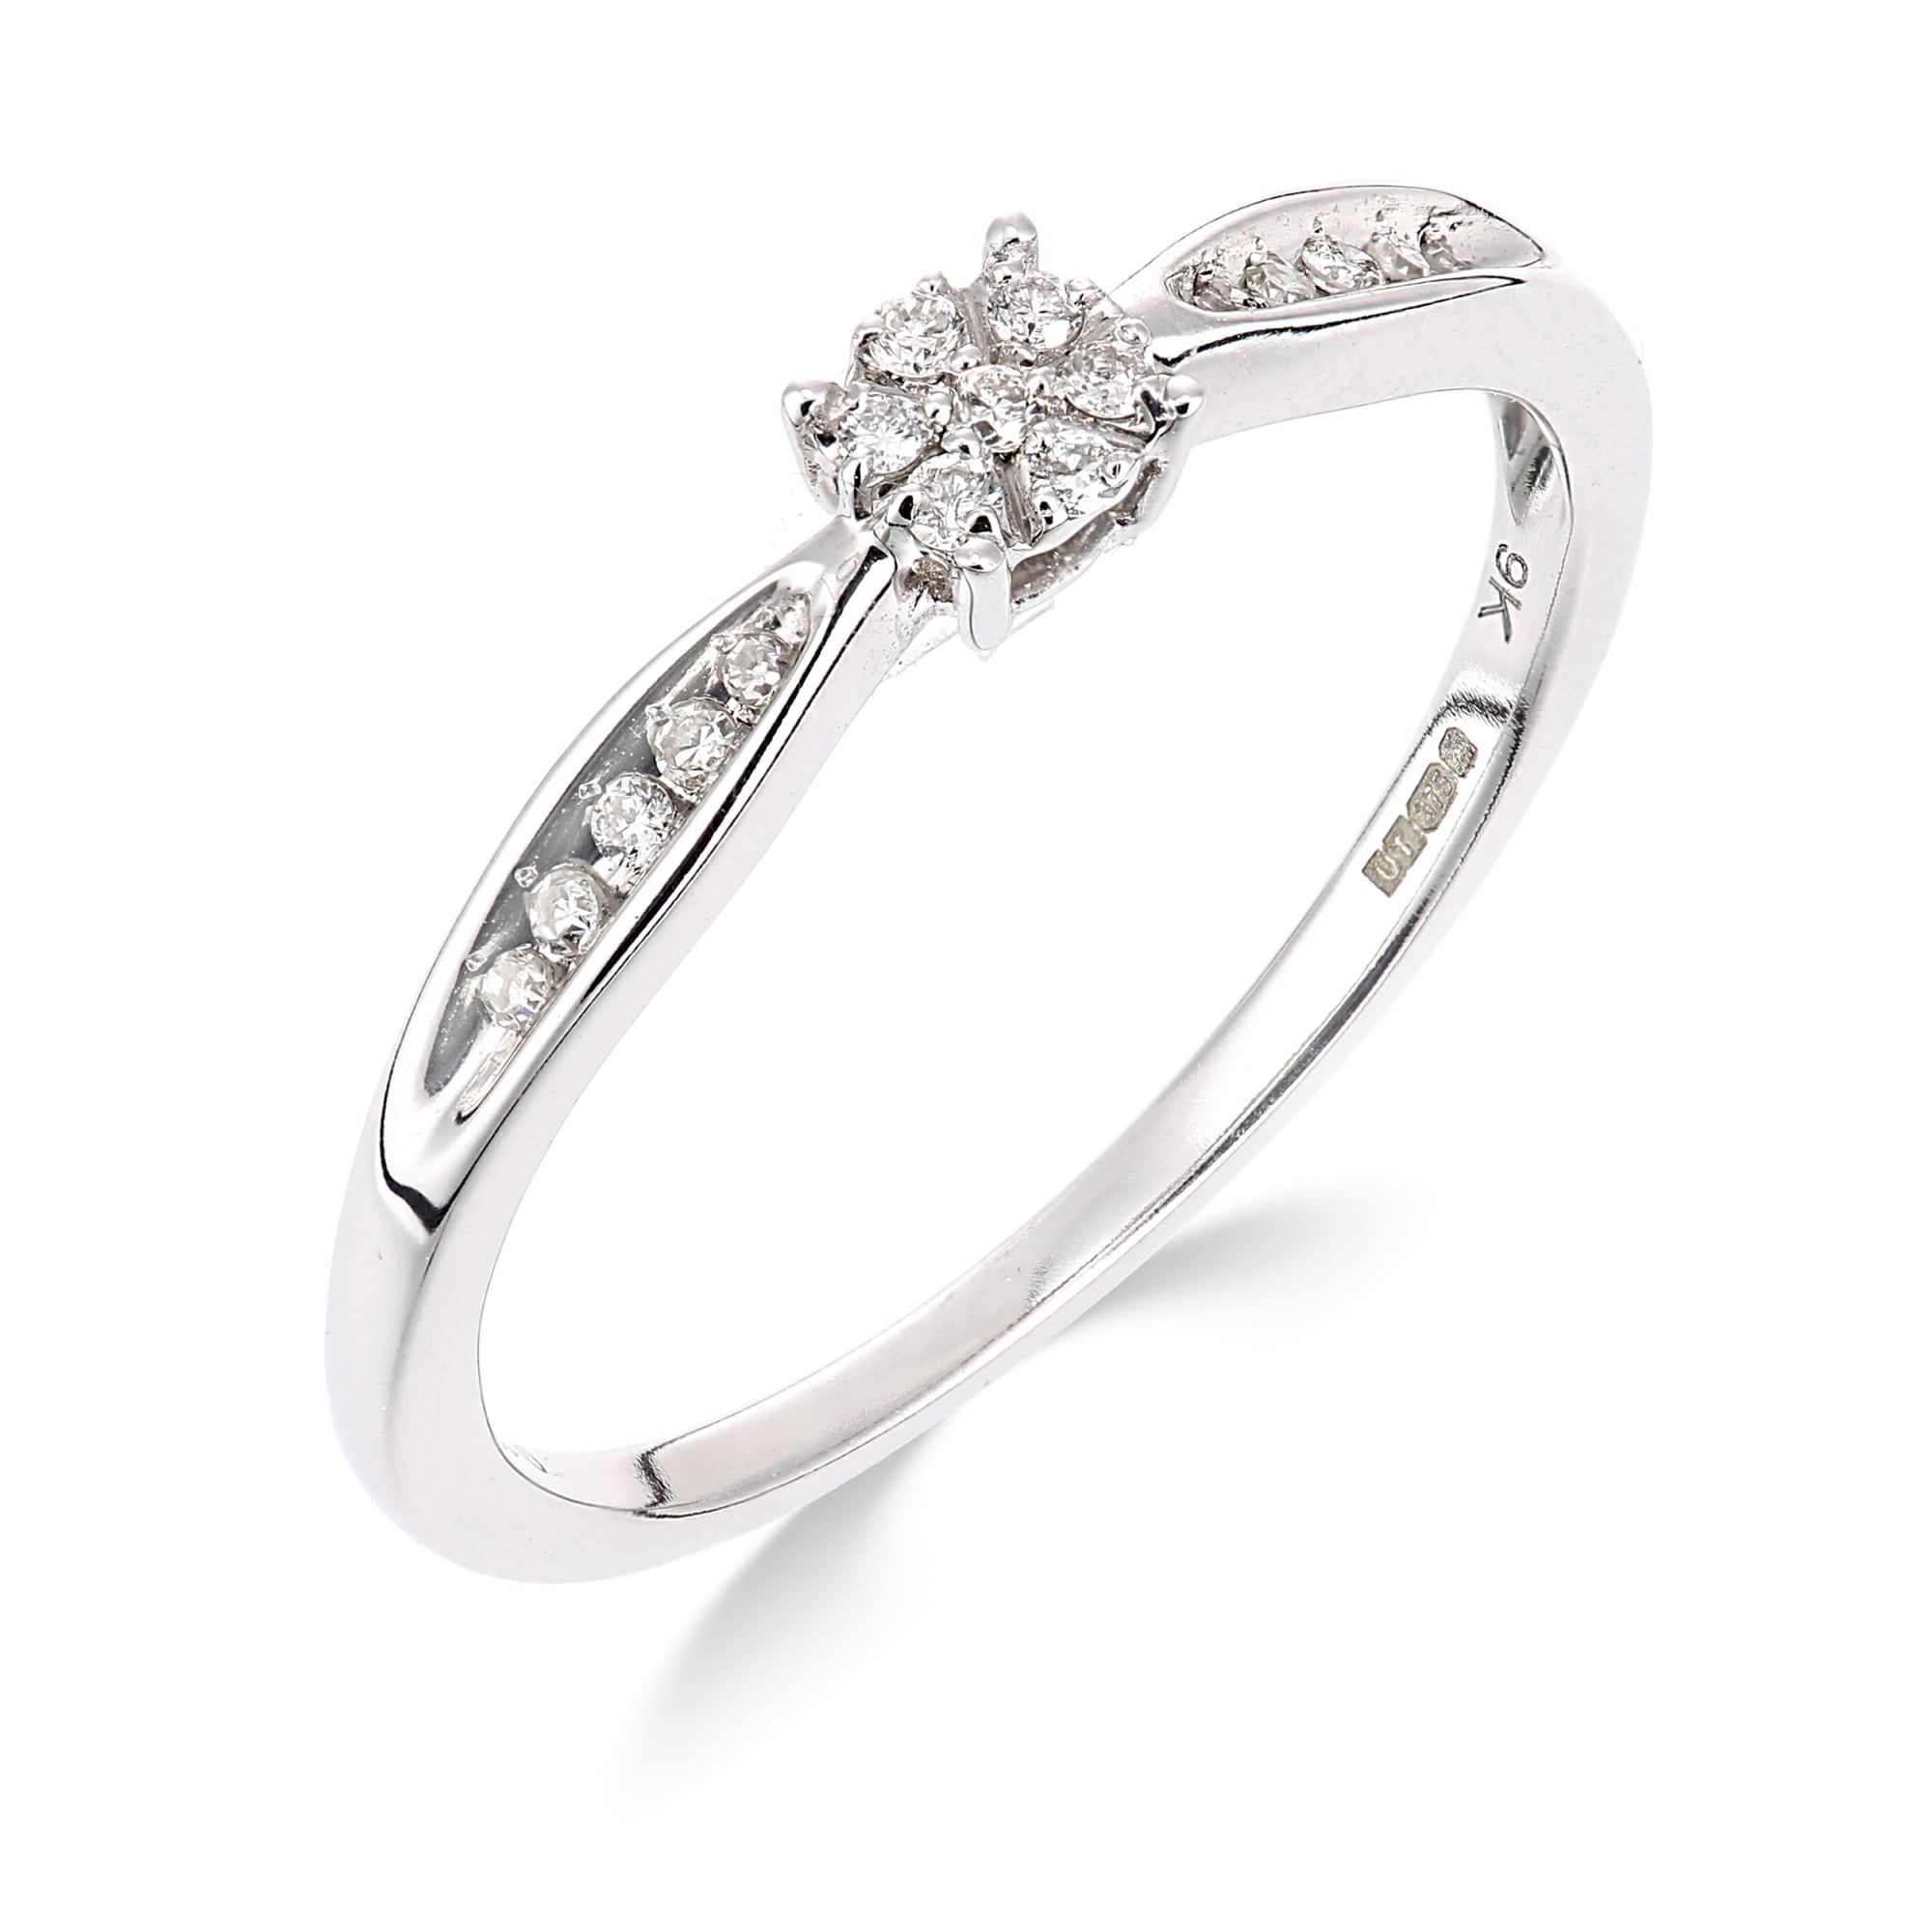 White Gold, Diamond cluster ring, Stunning sparkle, Timeless beauty, 2000x2000 HD Handy